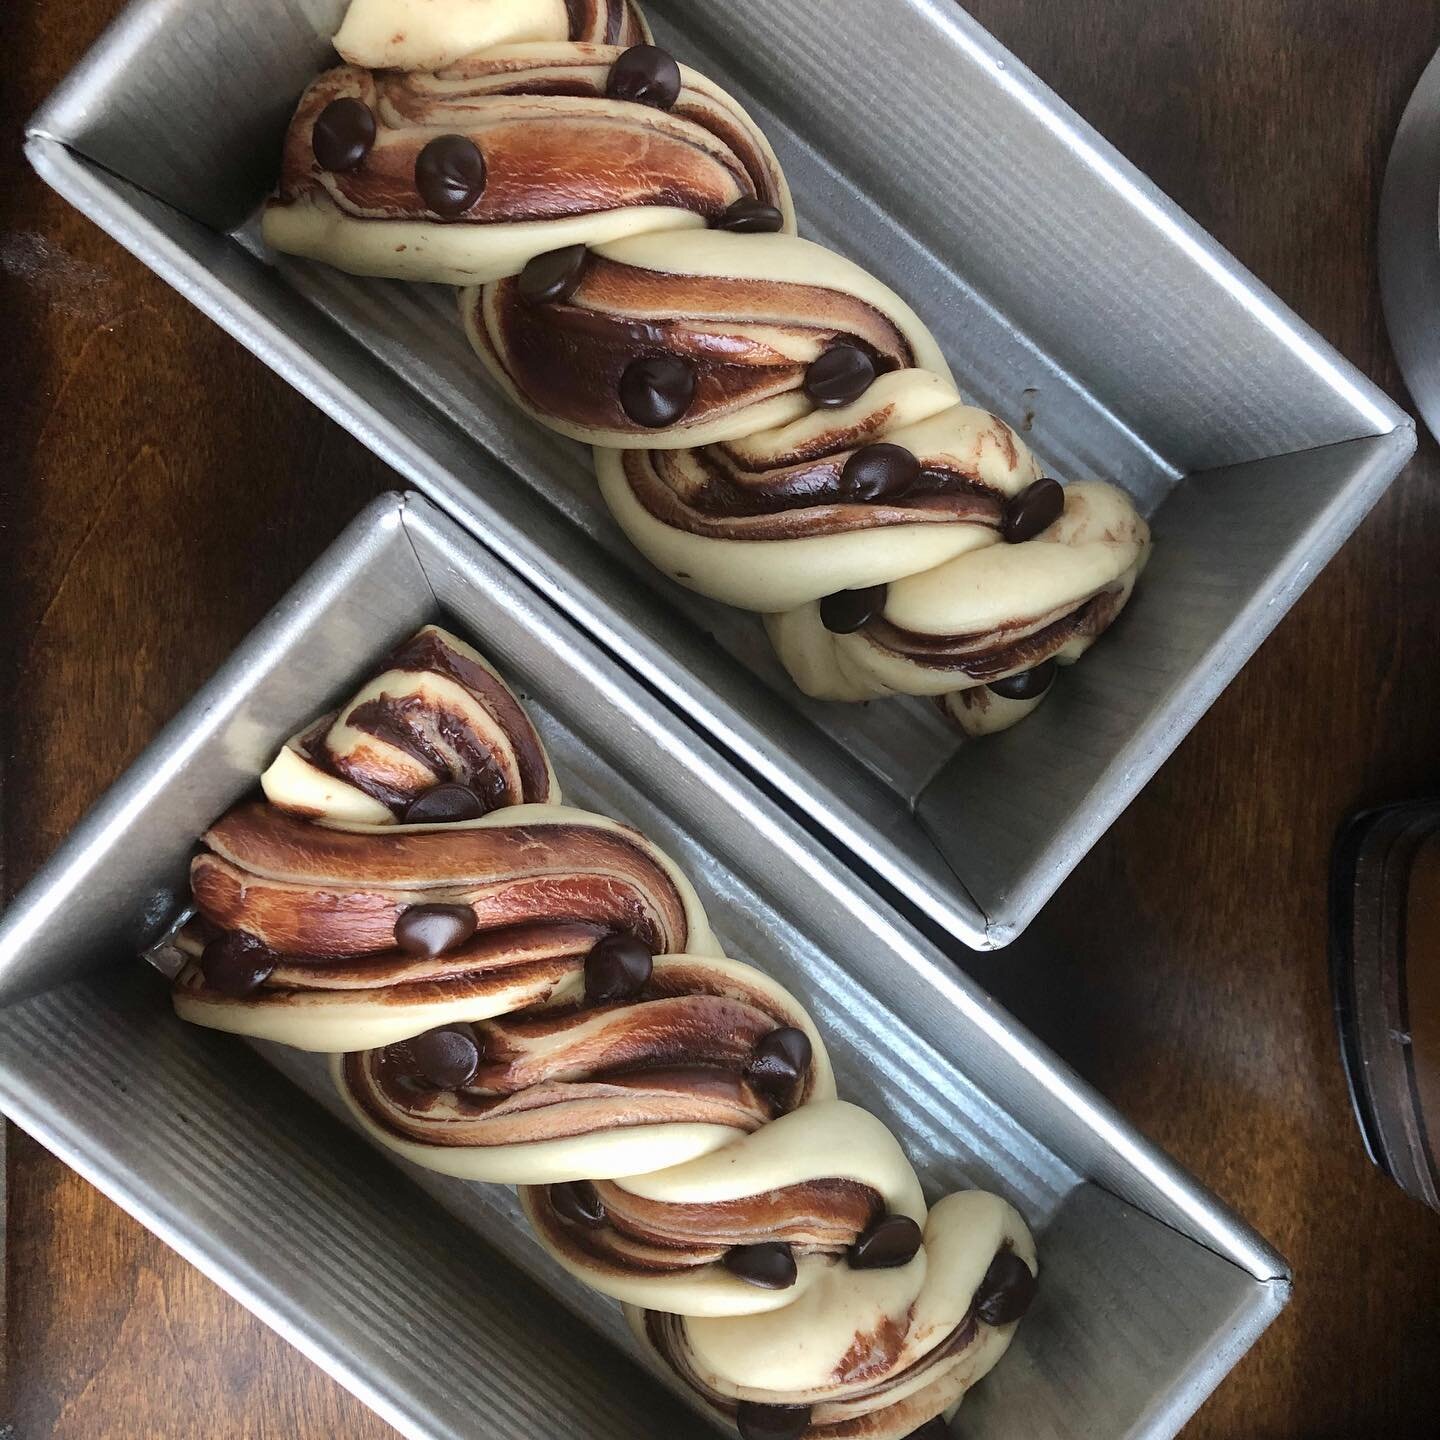 Made a couple of Babka for both homes.  An Eastern Europe yeast risen dough that is also popular in Isreal, it is braided and often layered with chocolate, cinnamon, or jam. Here I used #Nutella, always a crowd pleaser and a popular choice. As with m